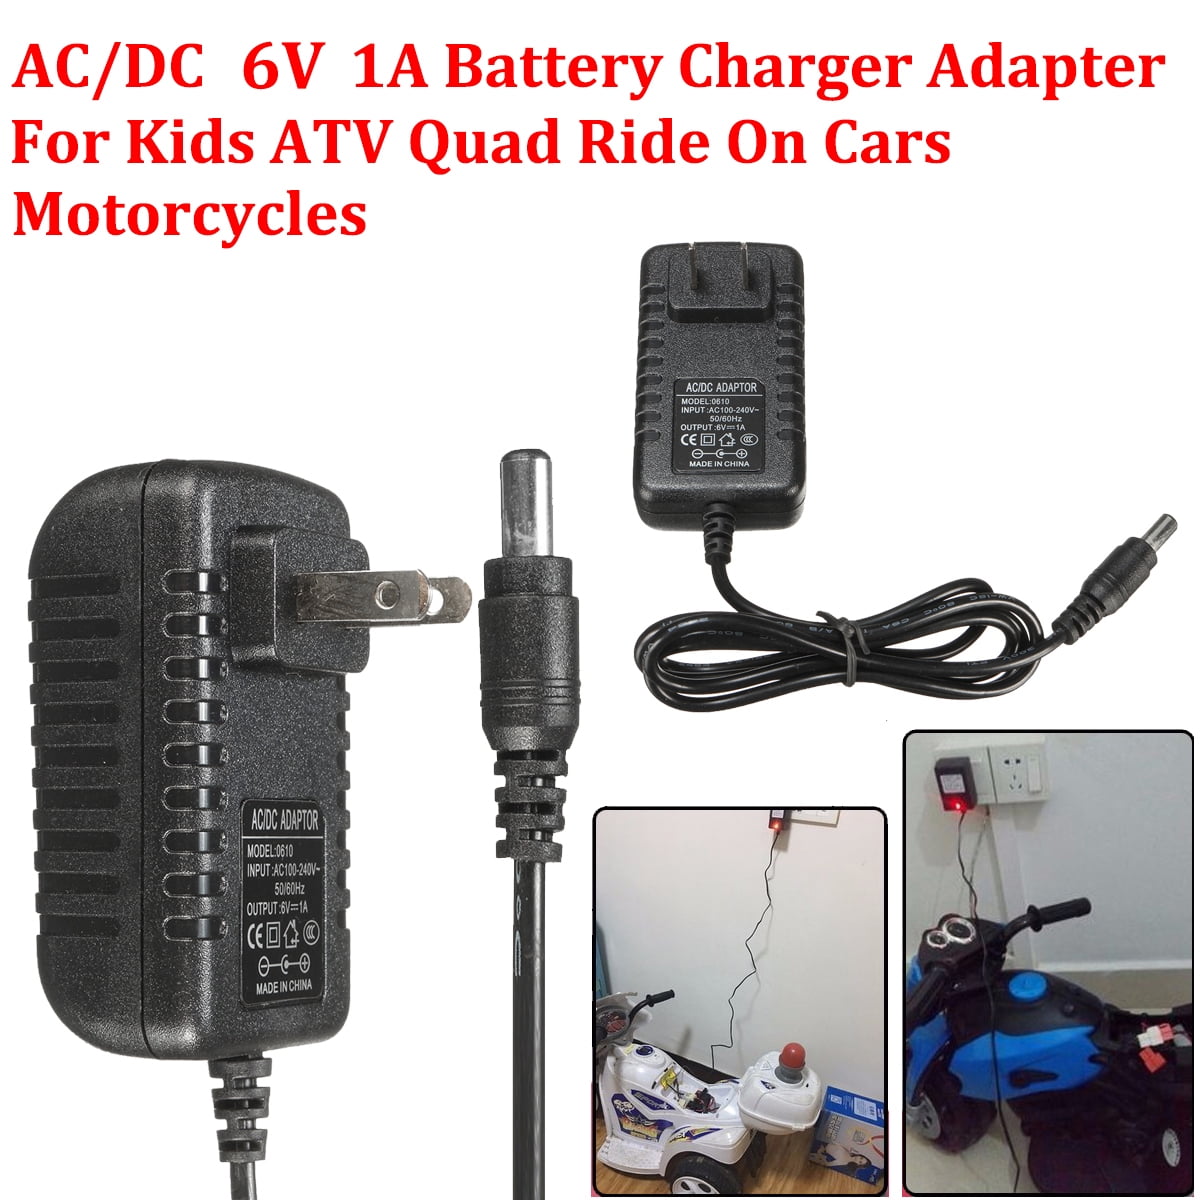 12V 1A Battery Charger Adapter For Kids ATV Quad Ride On Cars Motorcycle AC/DC 